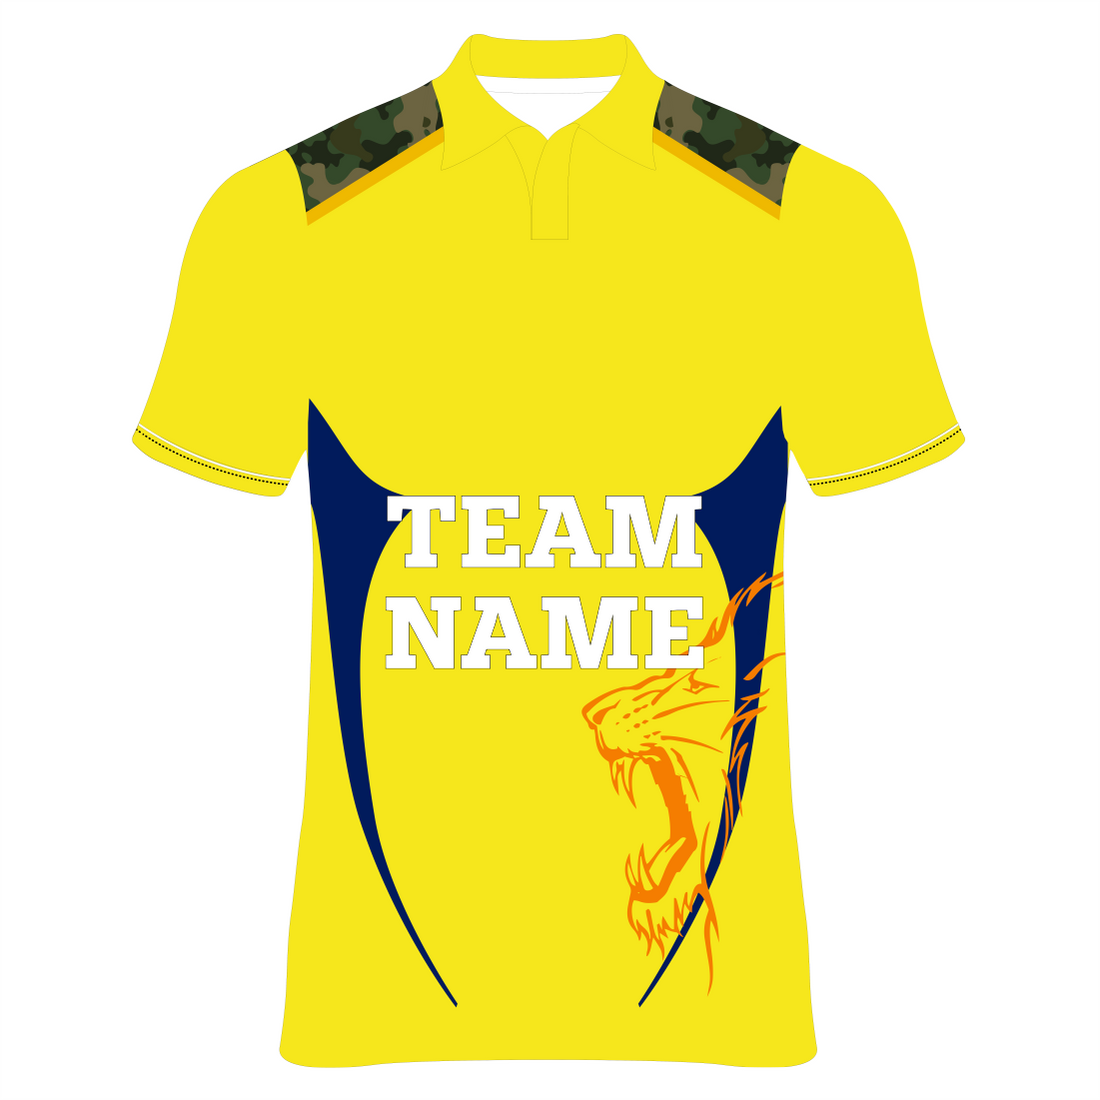 NEXT PRINT All Over Printed Customized Sublimation T-Shirt Unisex Sports Chennai Super Kings Cricket Jersey Player Name & Number, Team Name And Logo.NP030000